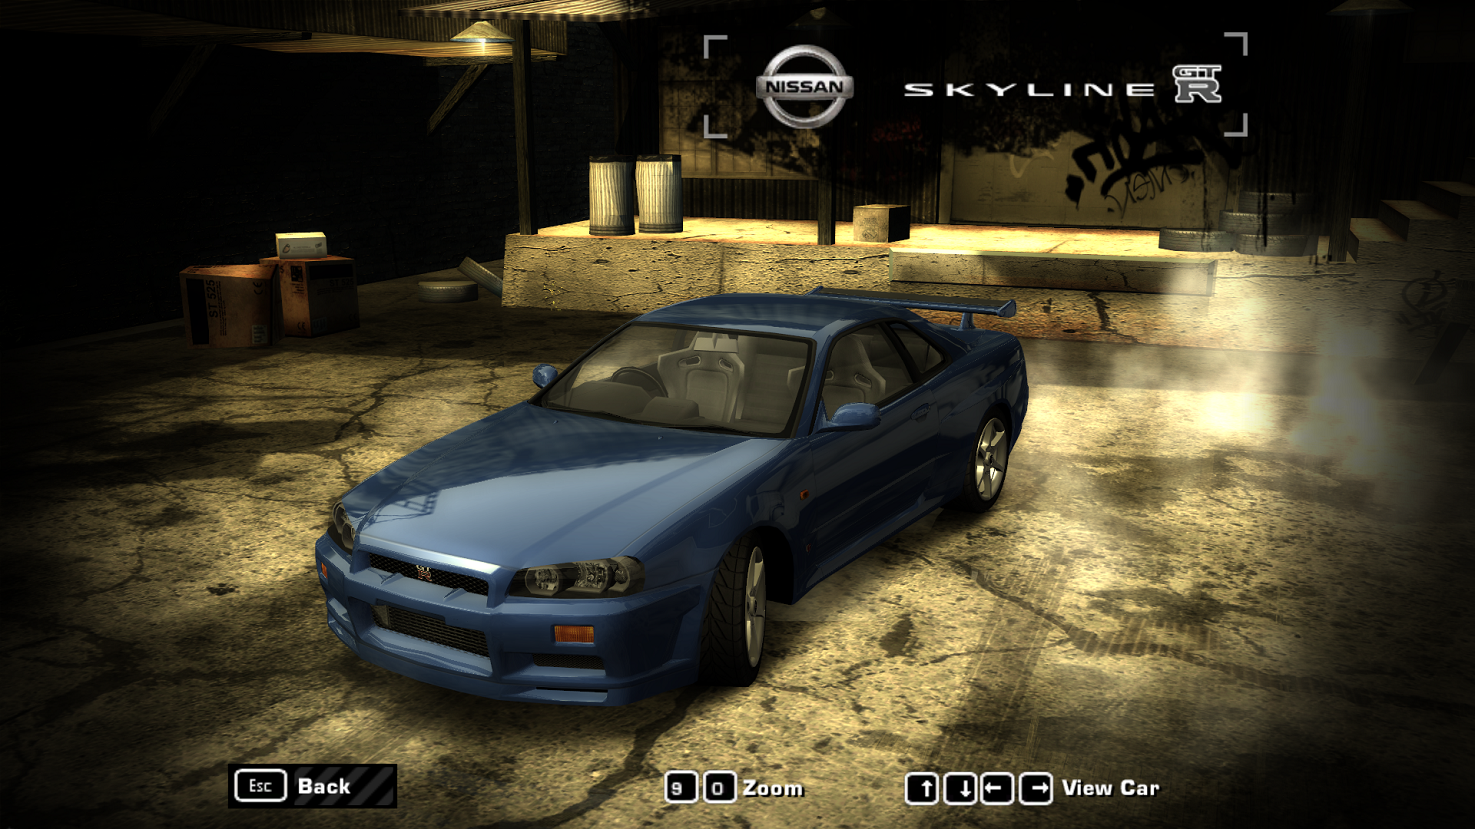 Need For Speed Most Wanted Nissan Brian's F&TF vinyl for Skyline R34